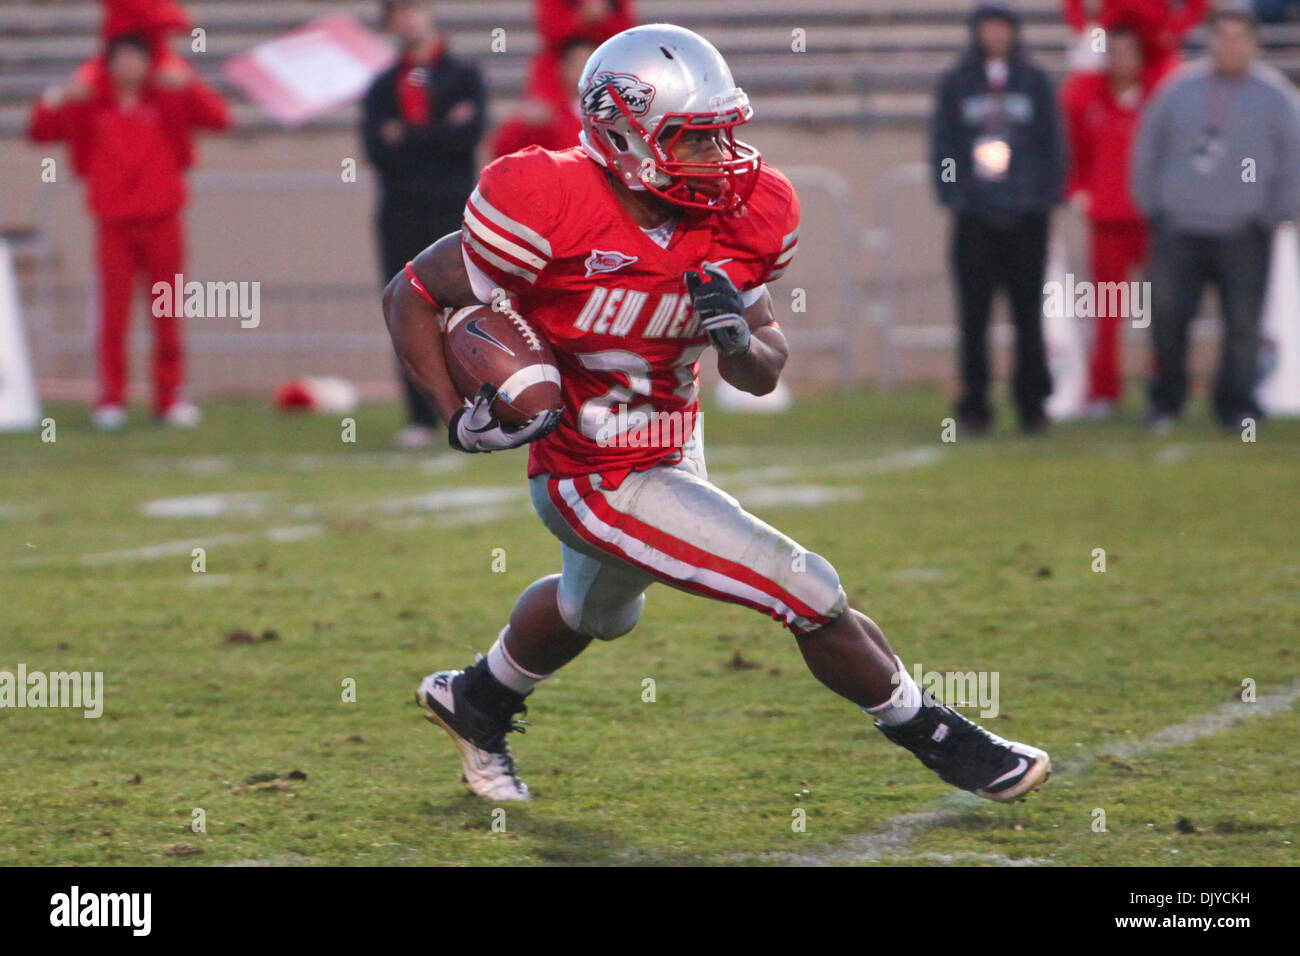 Nov. 27, 2010 - Albuquerque, New Mexico, United States of America - University of New Mexico running back Kasey Carrier (#21) returning a kick return. The Mountain West Conference Champions TCU defeated the Lobos 66-17 at University Stadium in Albuquerque, New Mexico. (Credit Image: © Long Nuygen/Southcreek Global/ZUMAPRESS.com) Stock Photo